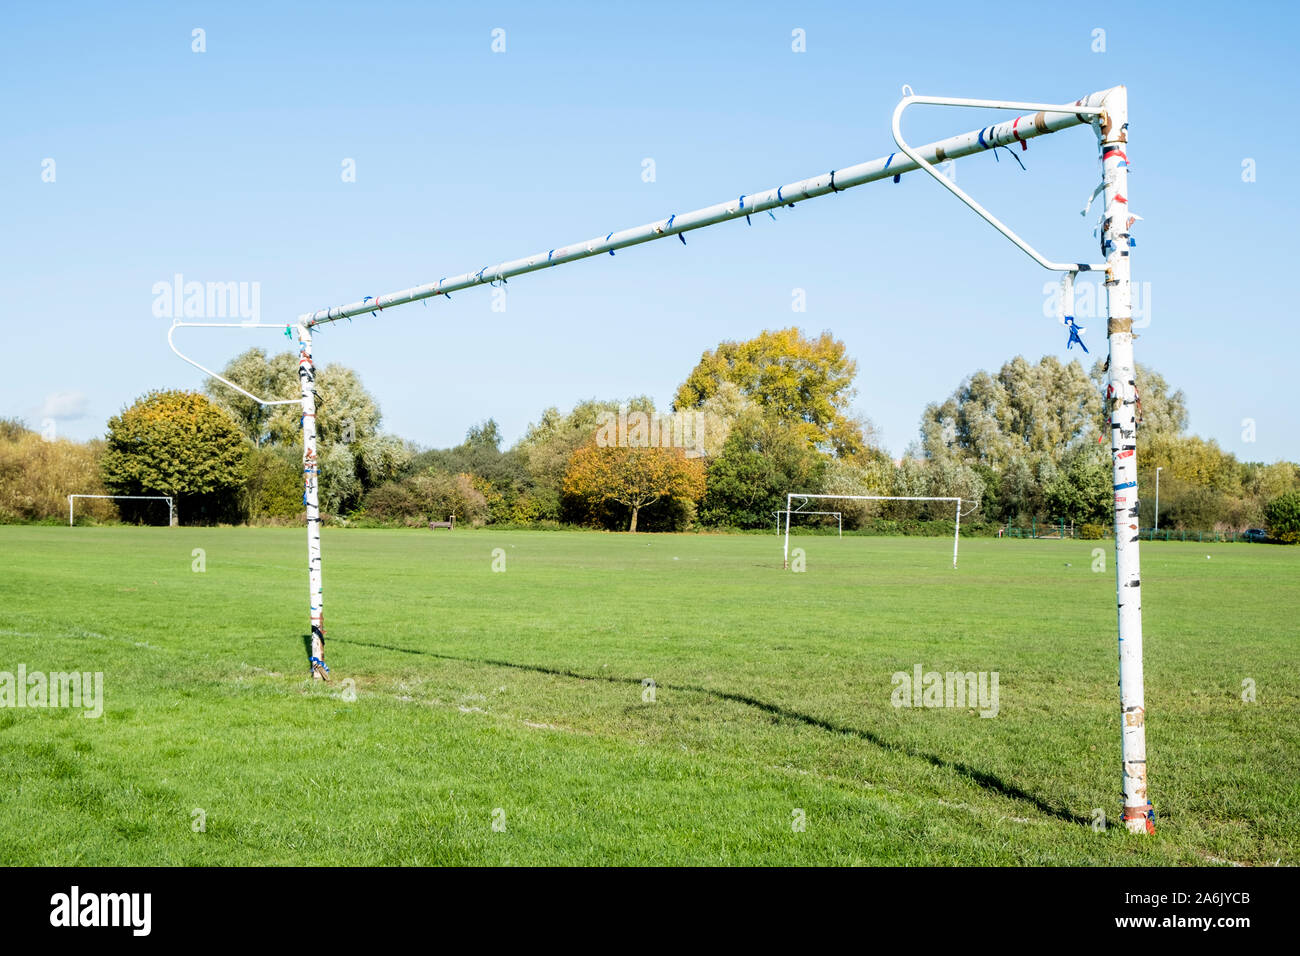 Old and well used metal goalpost on a playing field with other goalposts, Nottinghamshire, England, UK Stock Photo